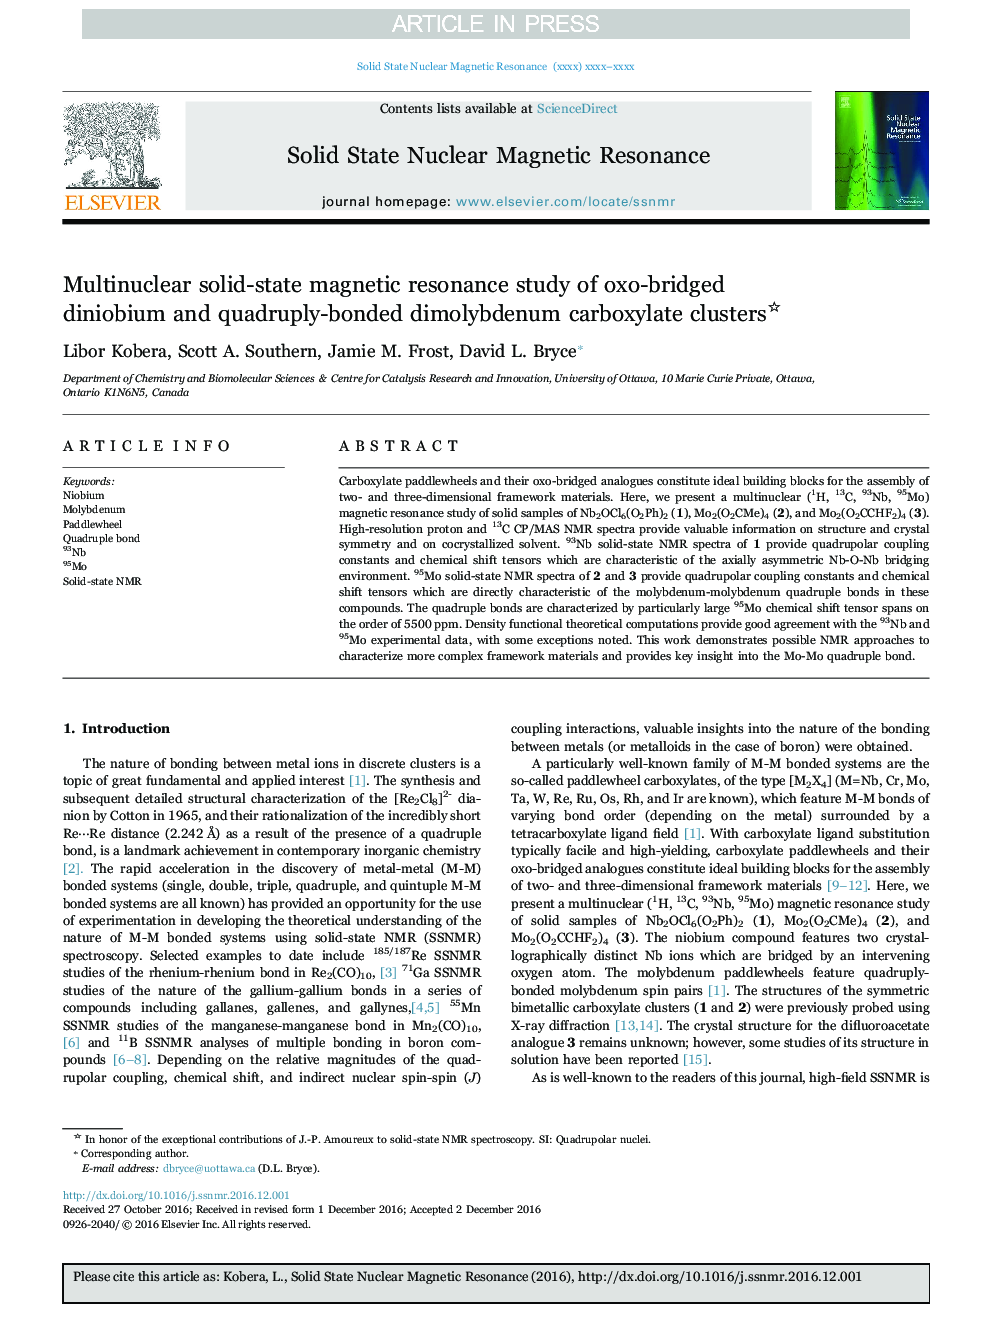 Multinuclear solid-state magnetic resonance study of oxo-bridged diniobium and quadruply-bonded dimolybdenum carboxylate clusters